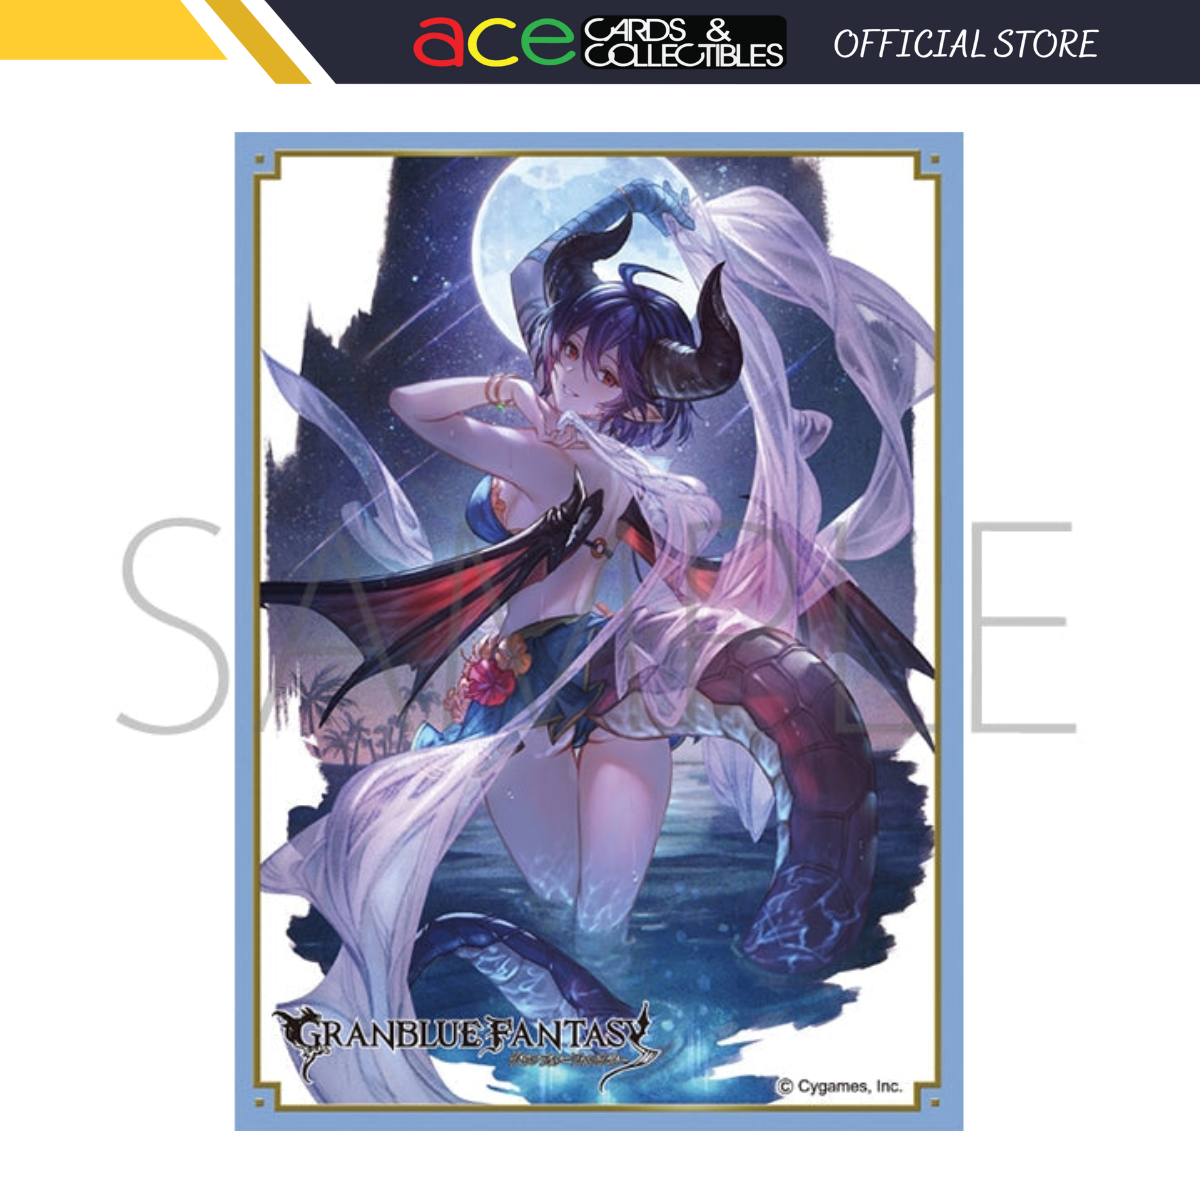 Movic Chara Sleeve Matte Series - Granblue Fantasy "Midsummer Dragoness Grea" (MT1620)-Movic-Ace Cards & Collectibles